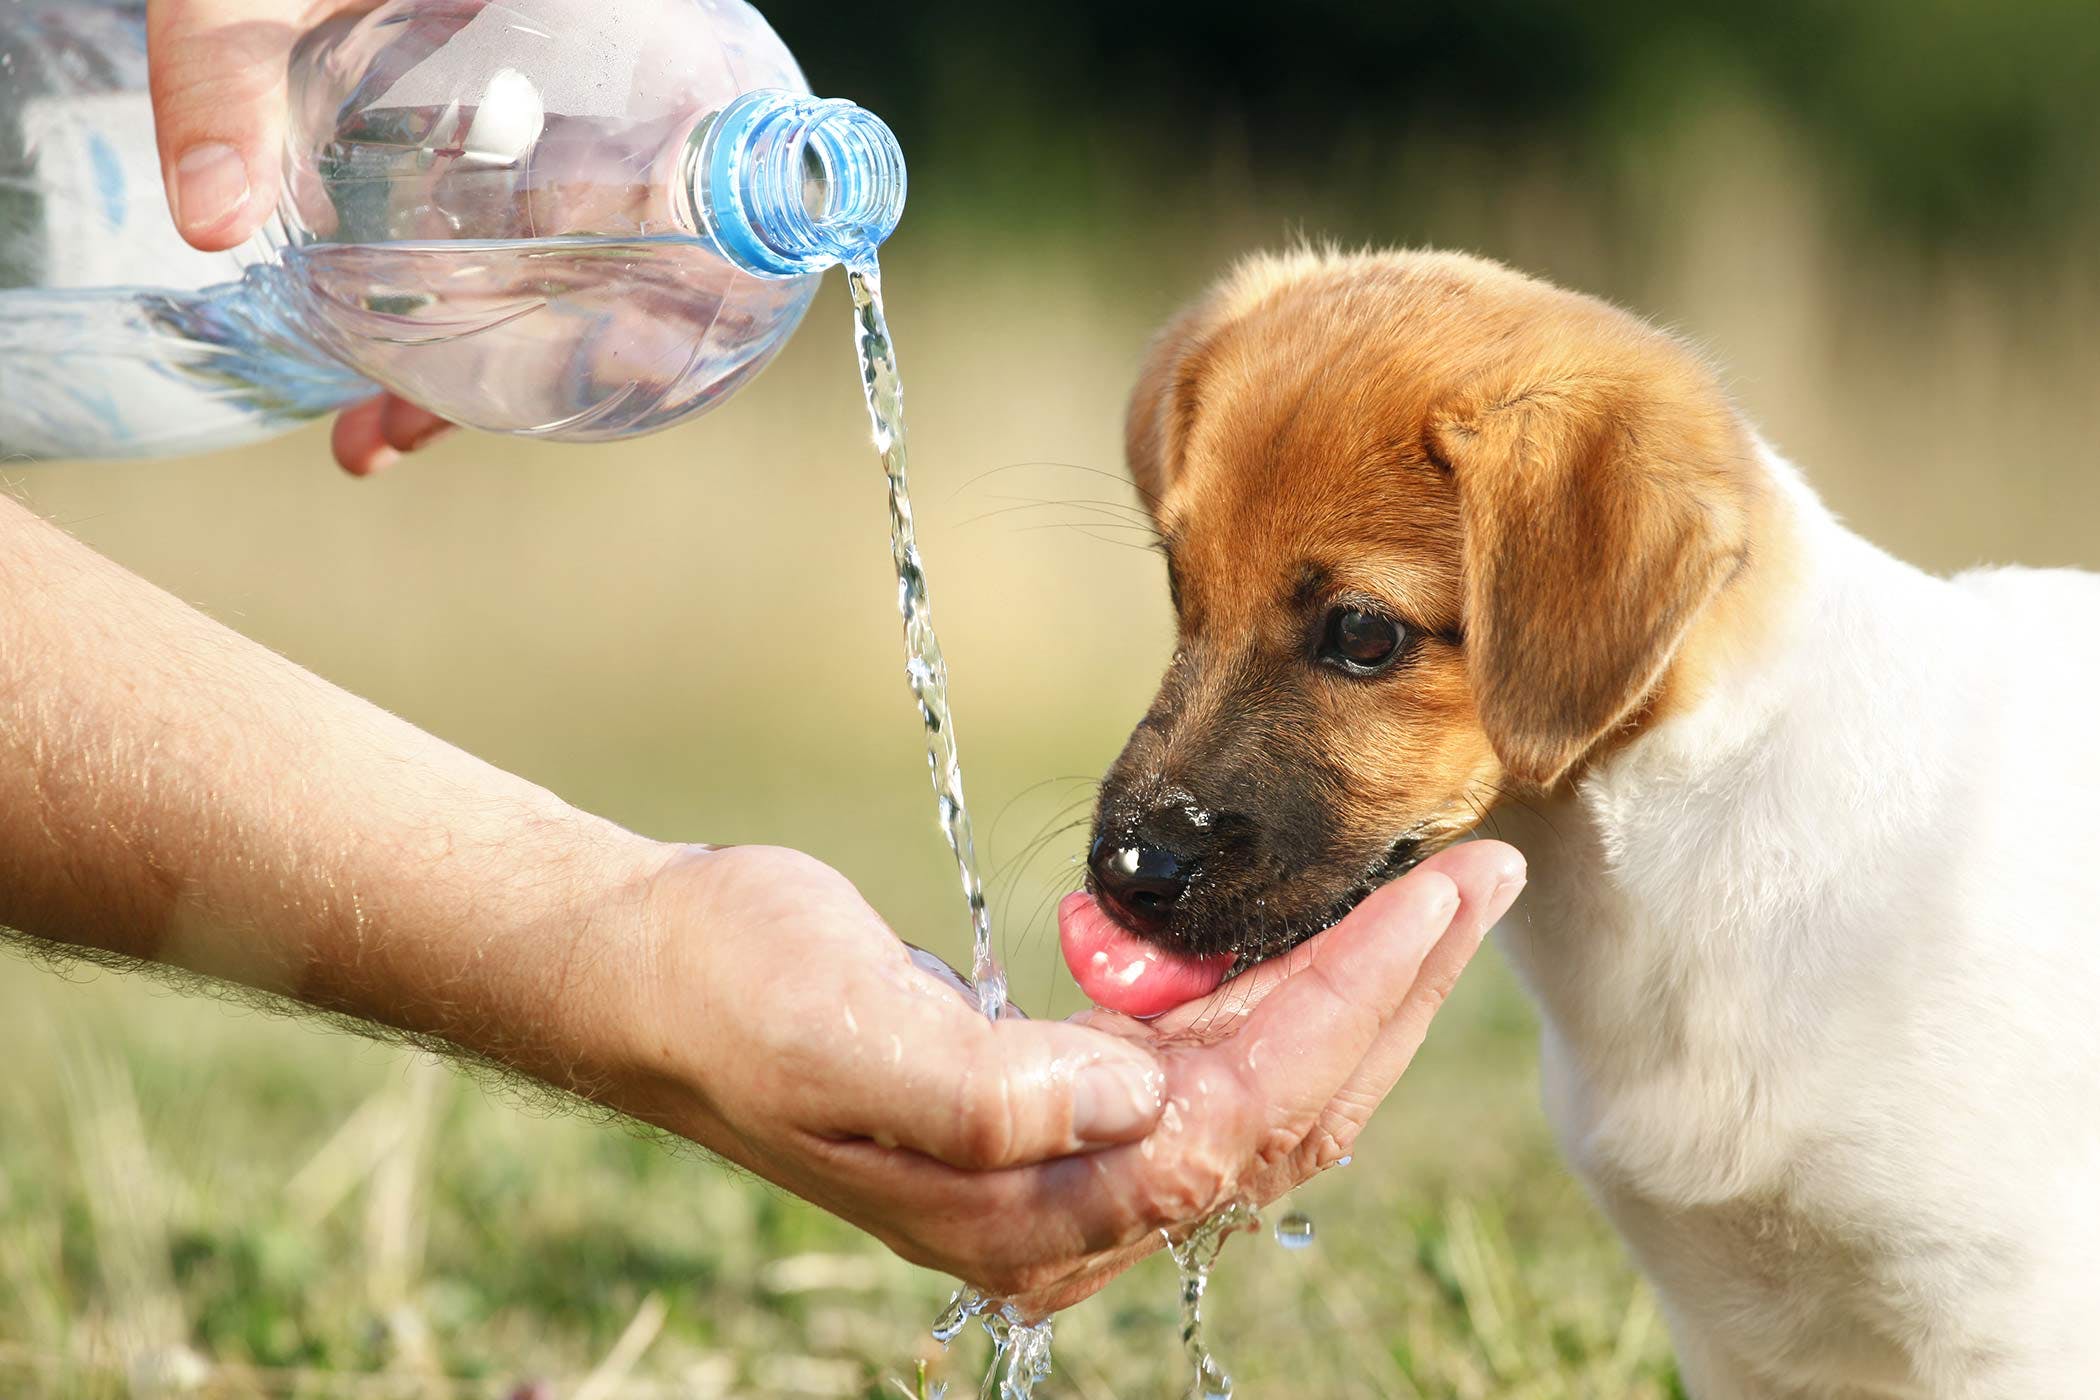 What happens if a dog drinks water before surgery?